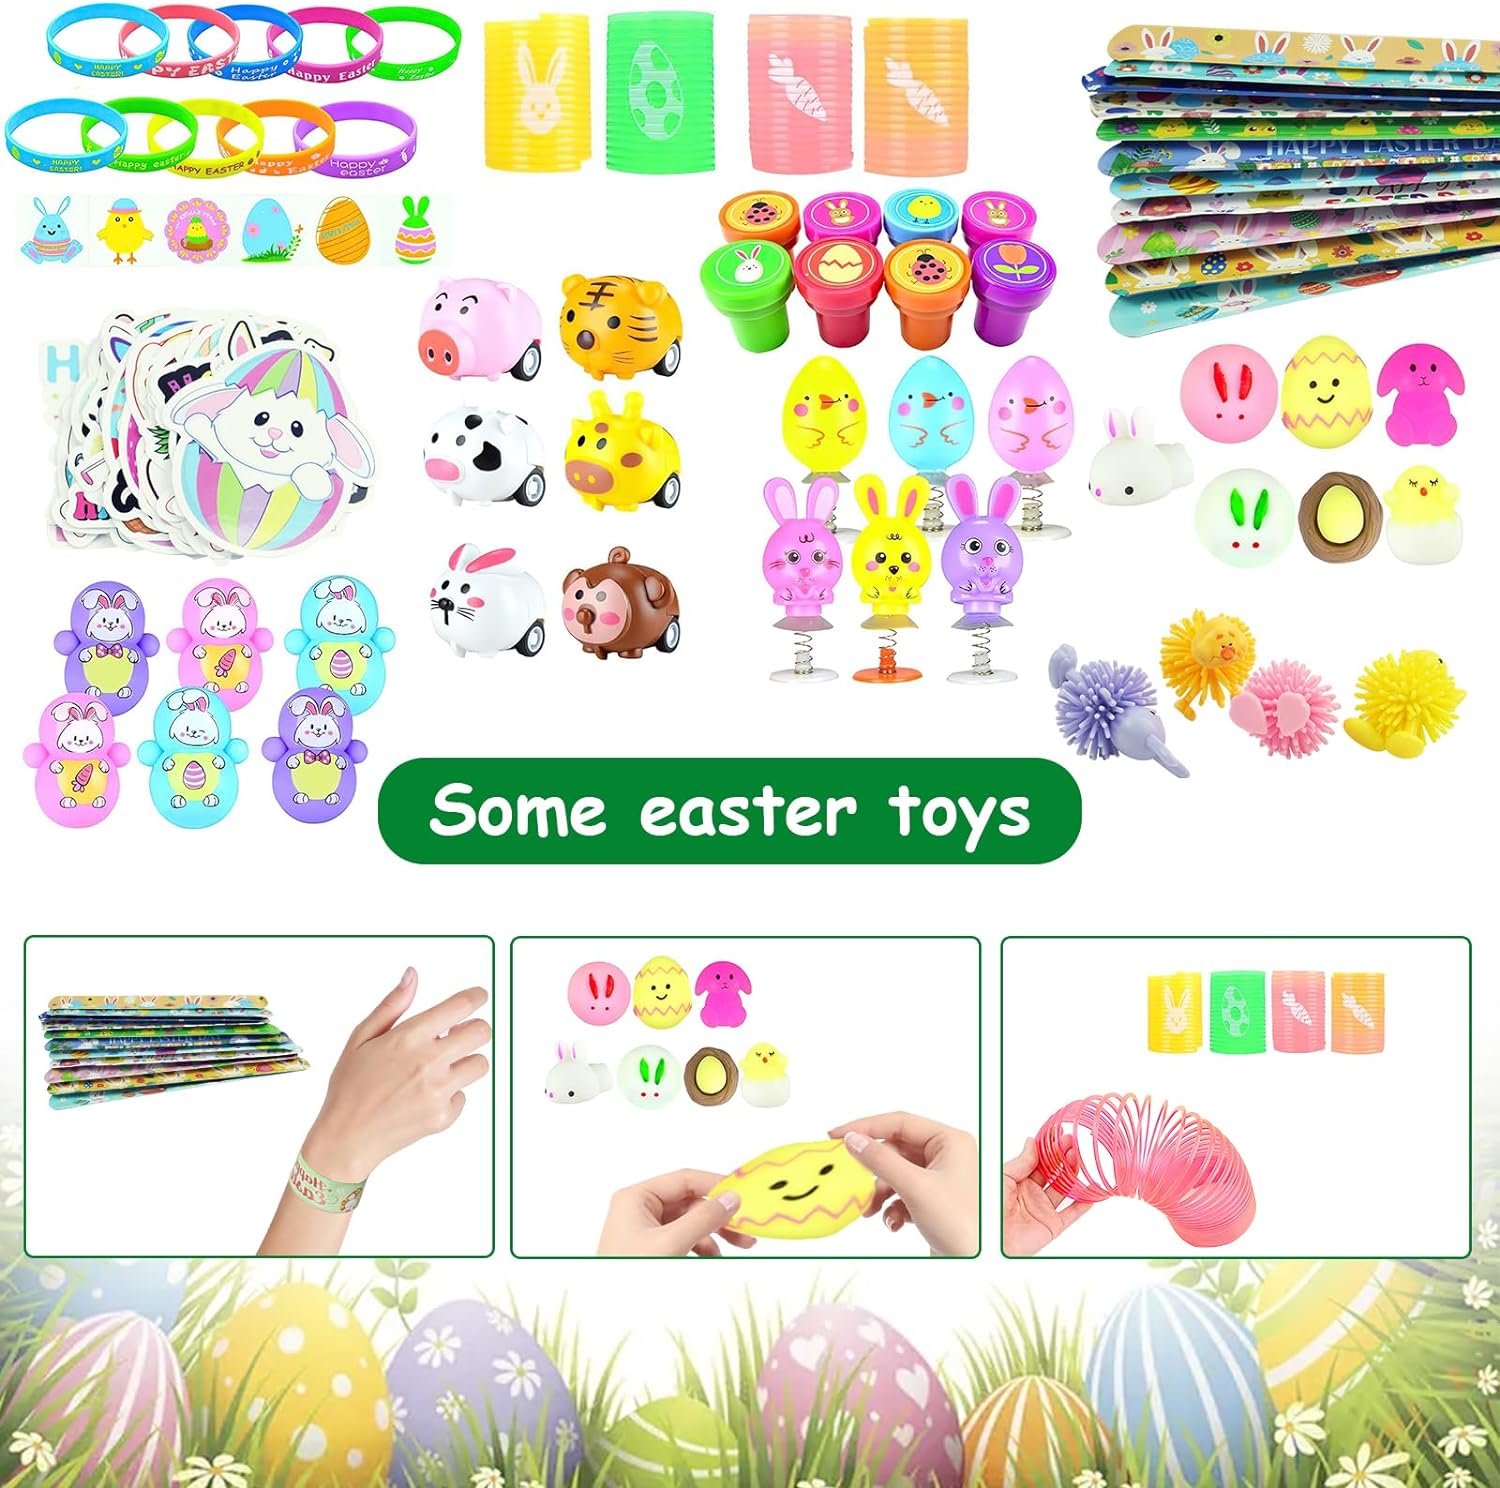 100 Pcs Easter Basket Stuffers with Toys, Party Favors for Kids Boys Girls, Easter Theme Toys with Squishy Toys Cykapu